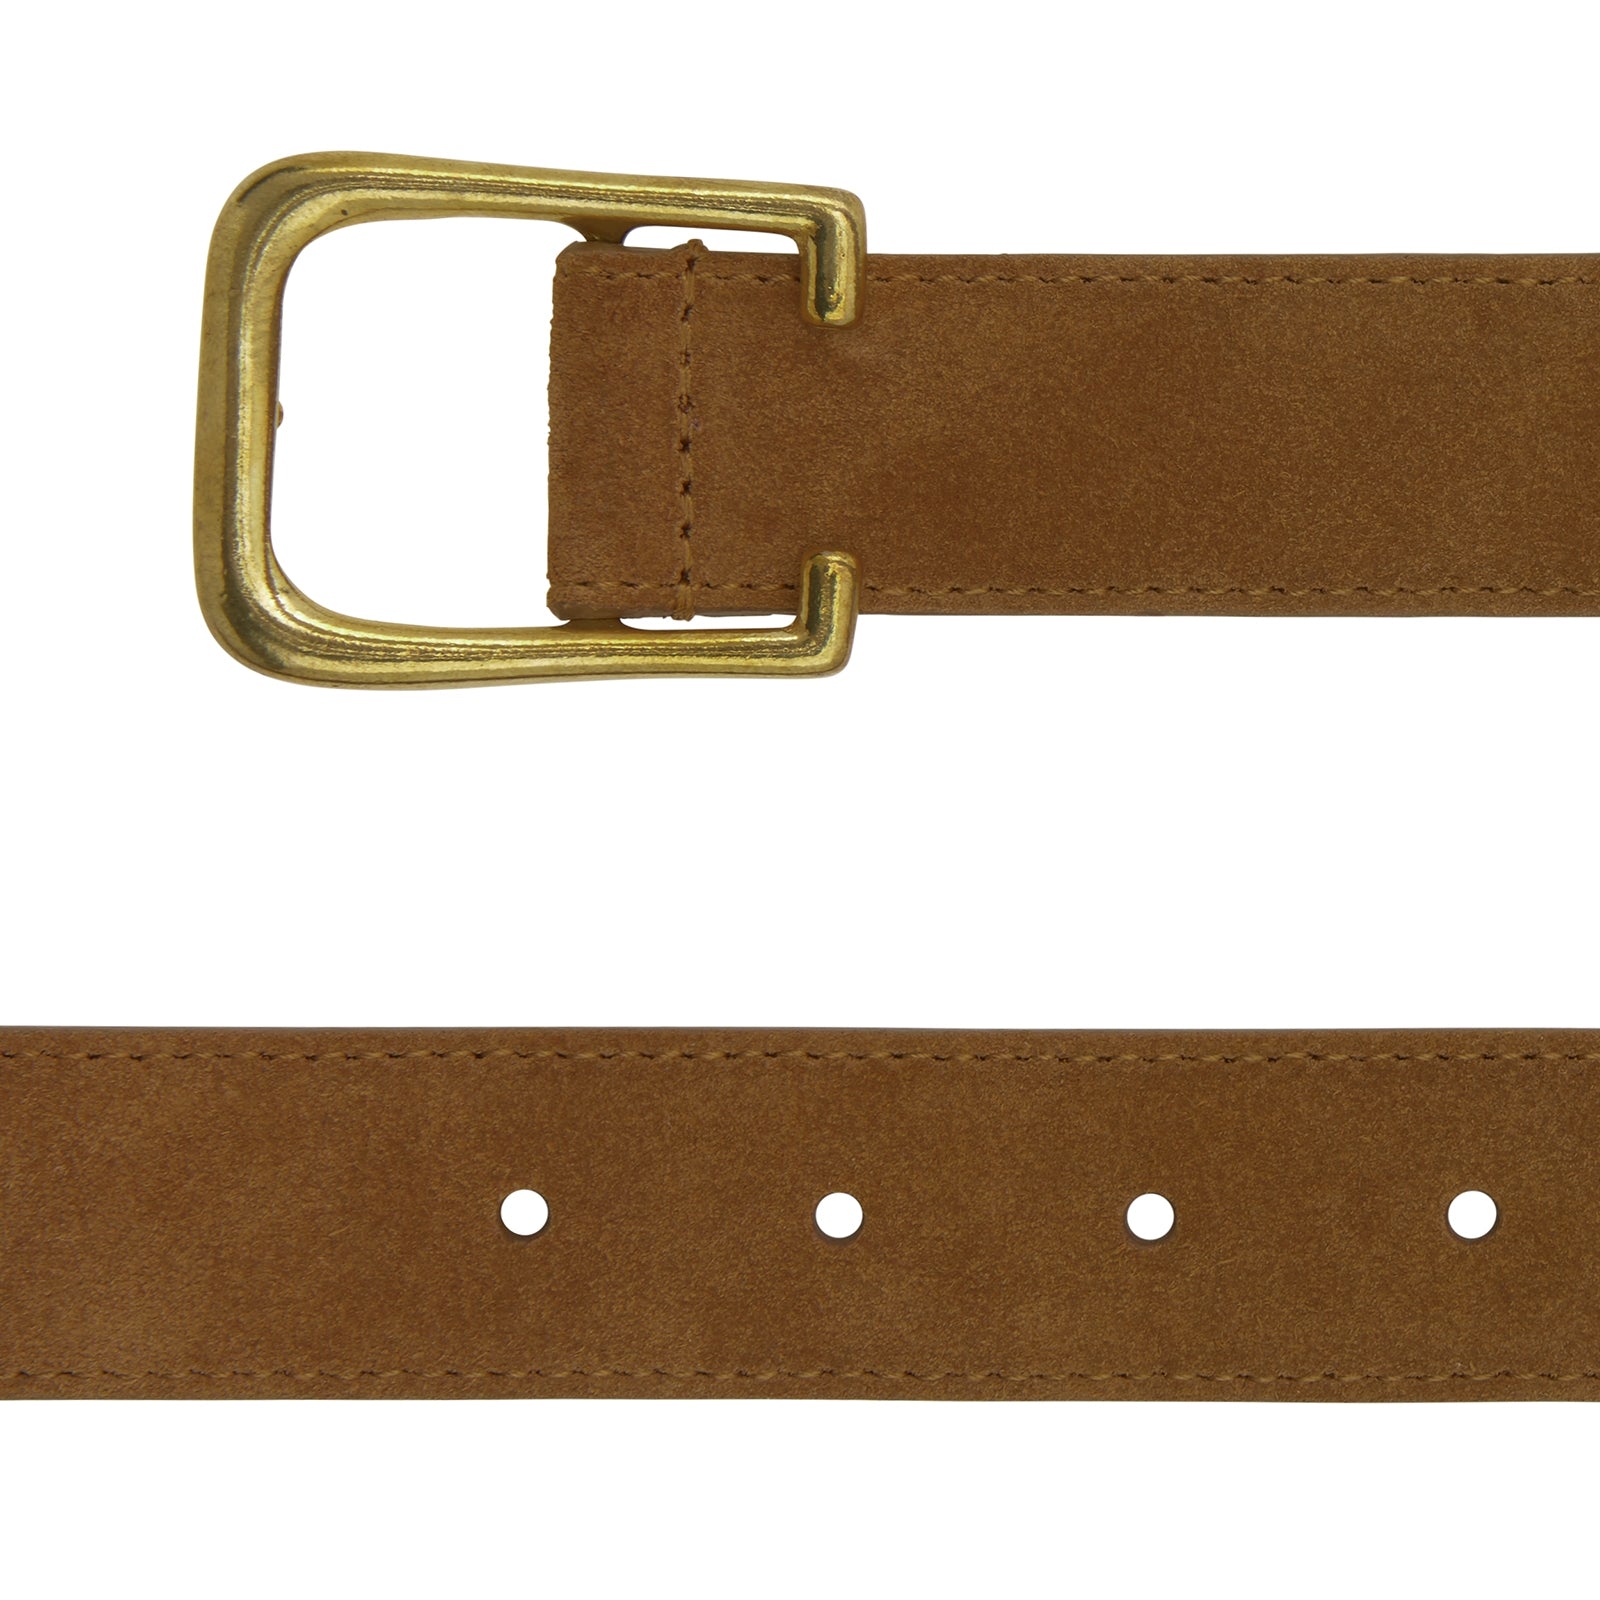 Brown Suede Leather Belt